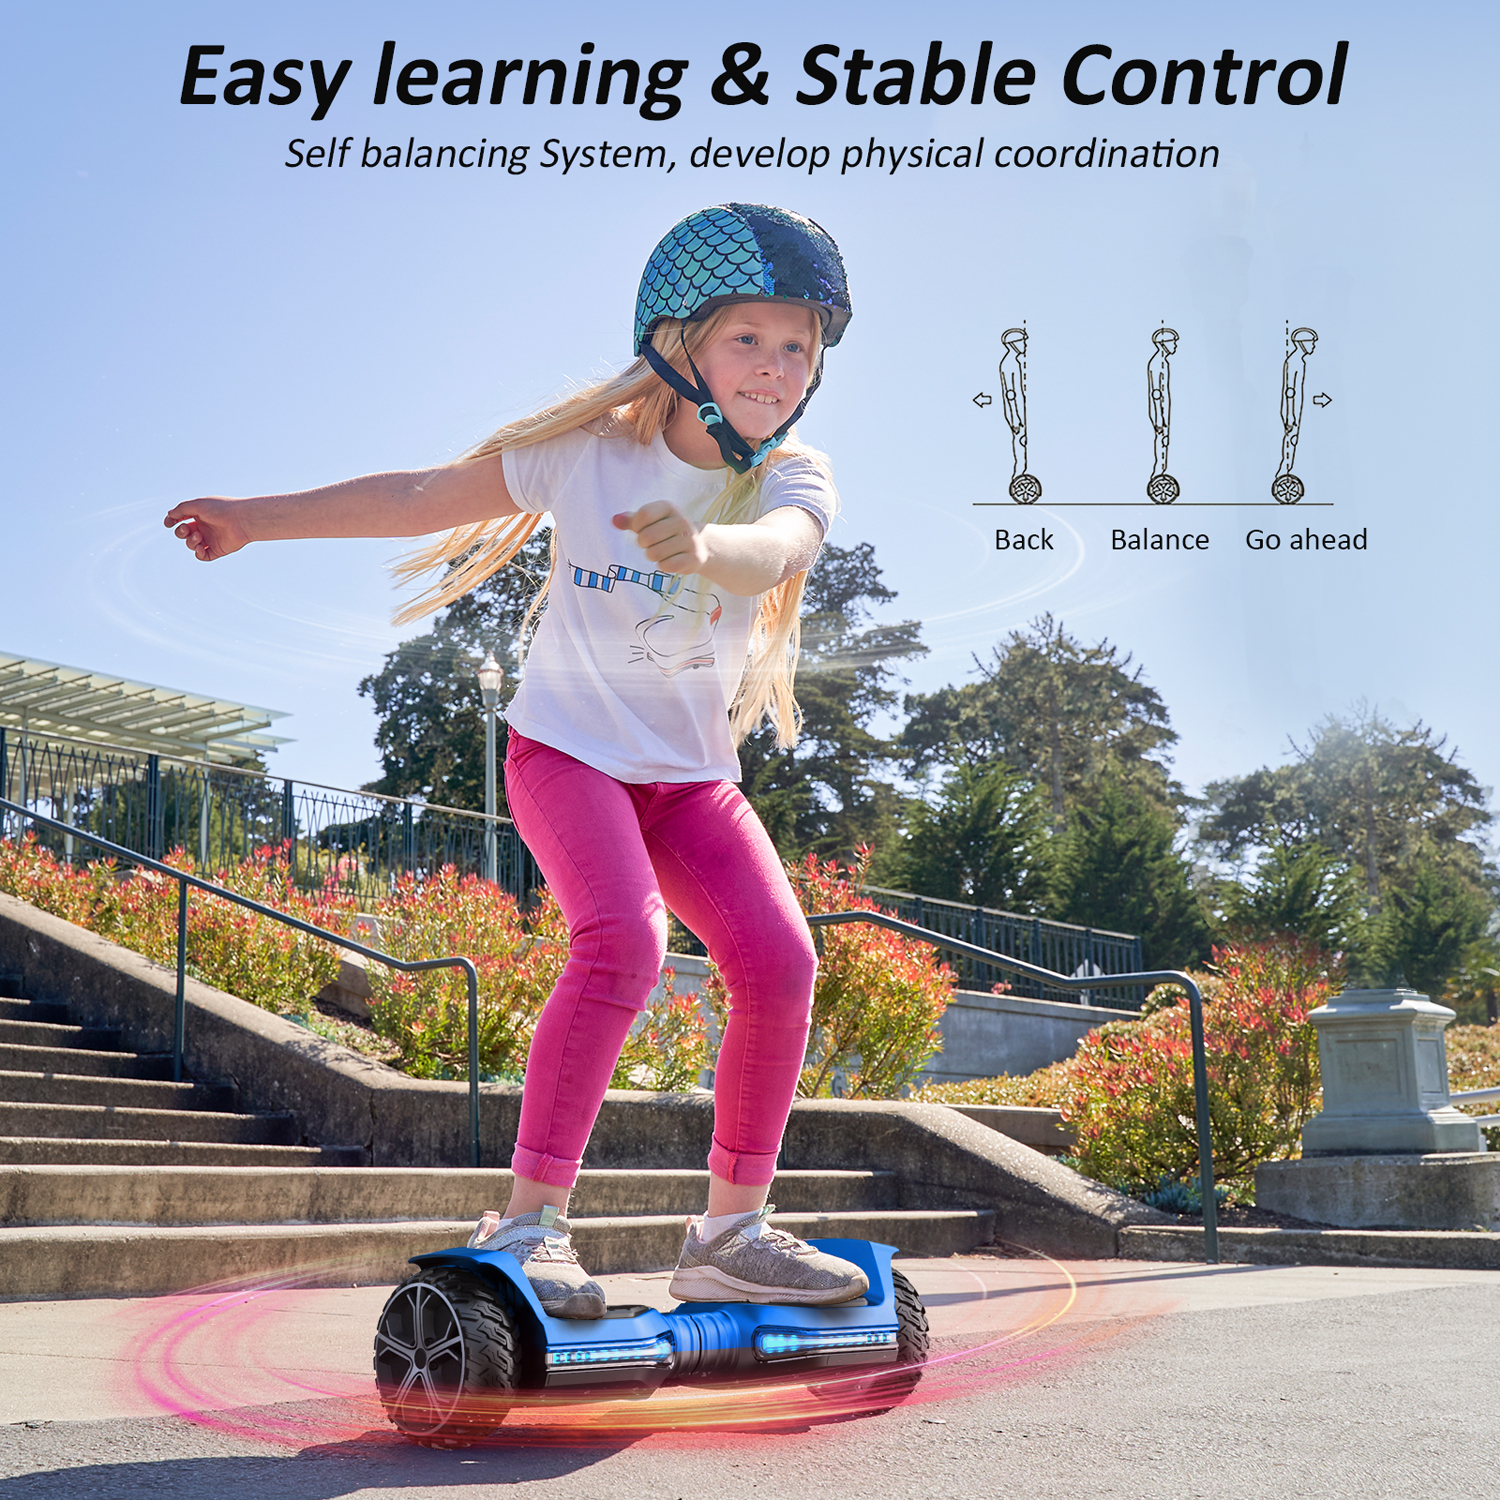 Flash Wheel Hoverboard with Bluetooth Speaker, Self Balancing Scooter for Kids & Adults, UL2272 Certified - image 4 of 12